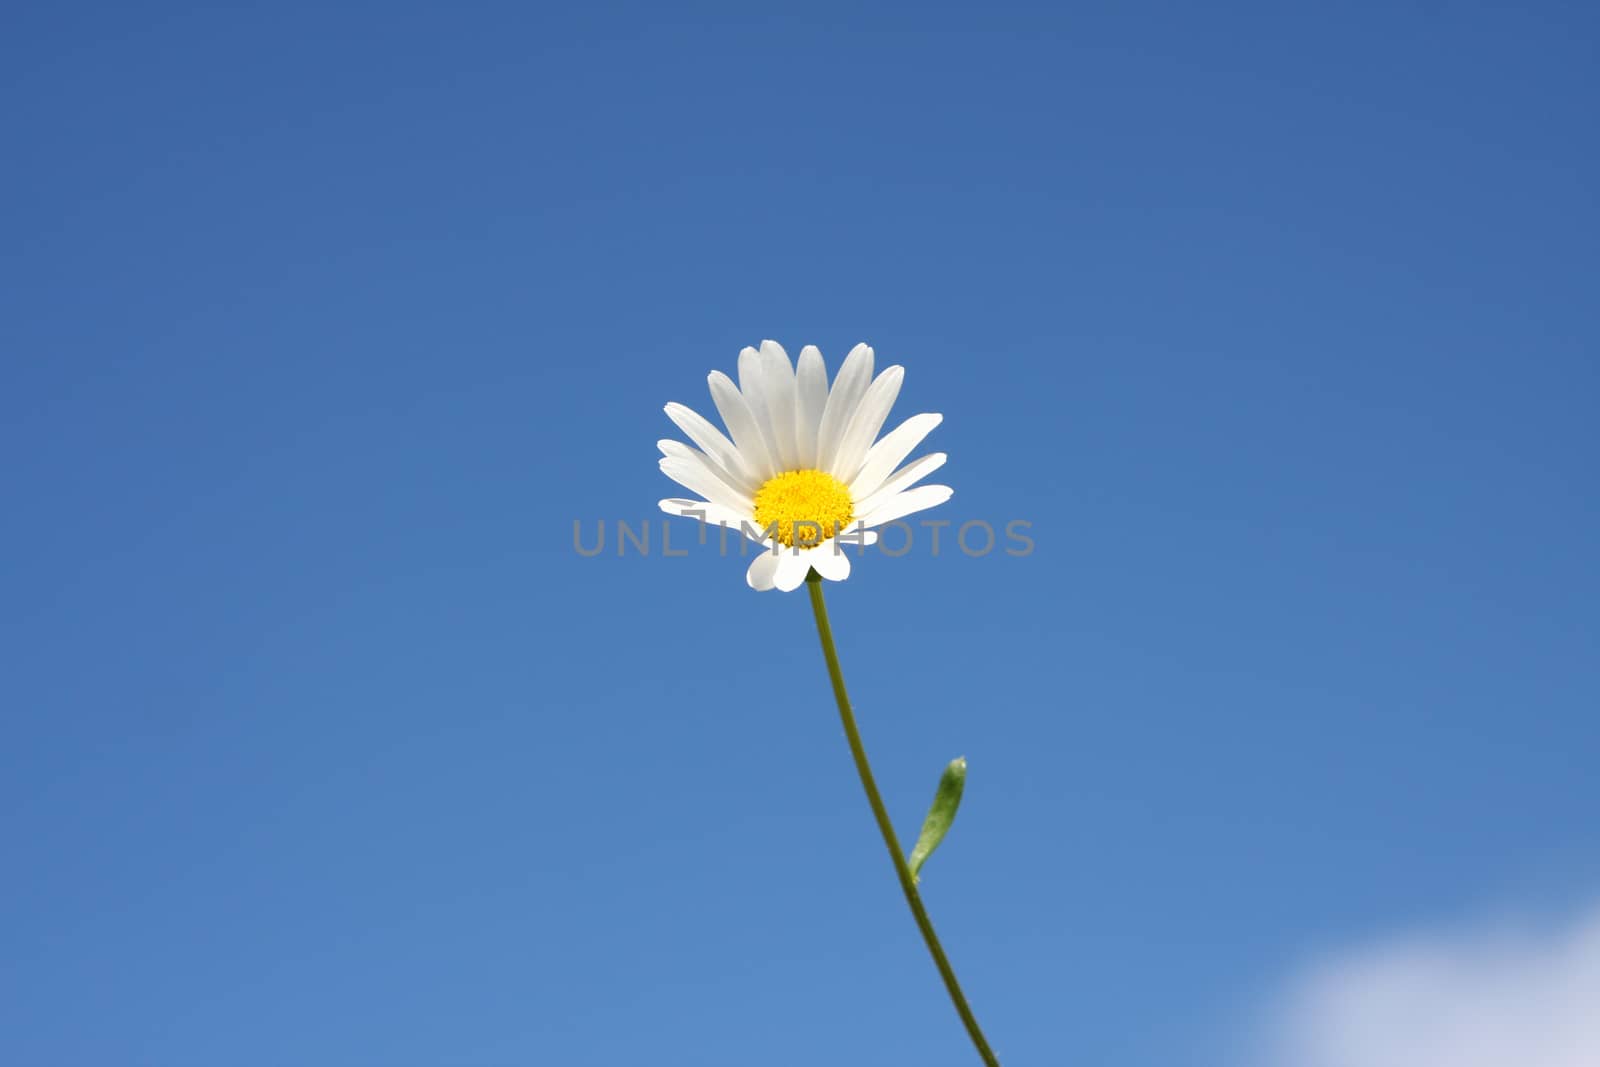 marguerite flower and the blue sky background by magann